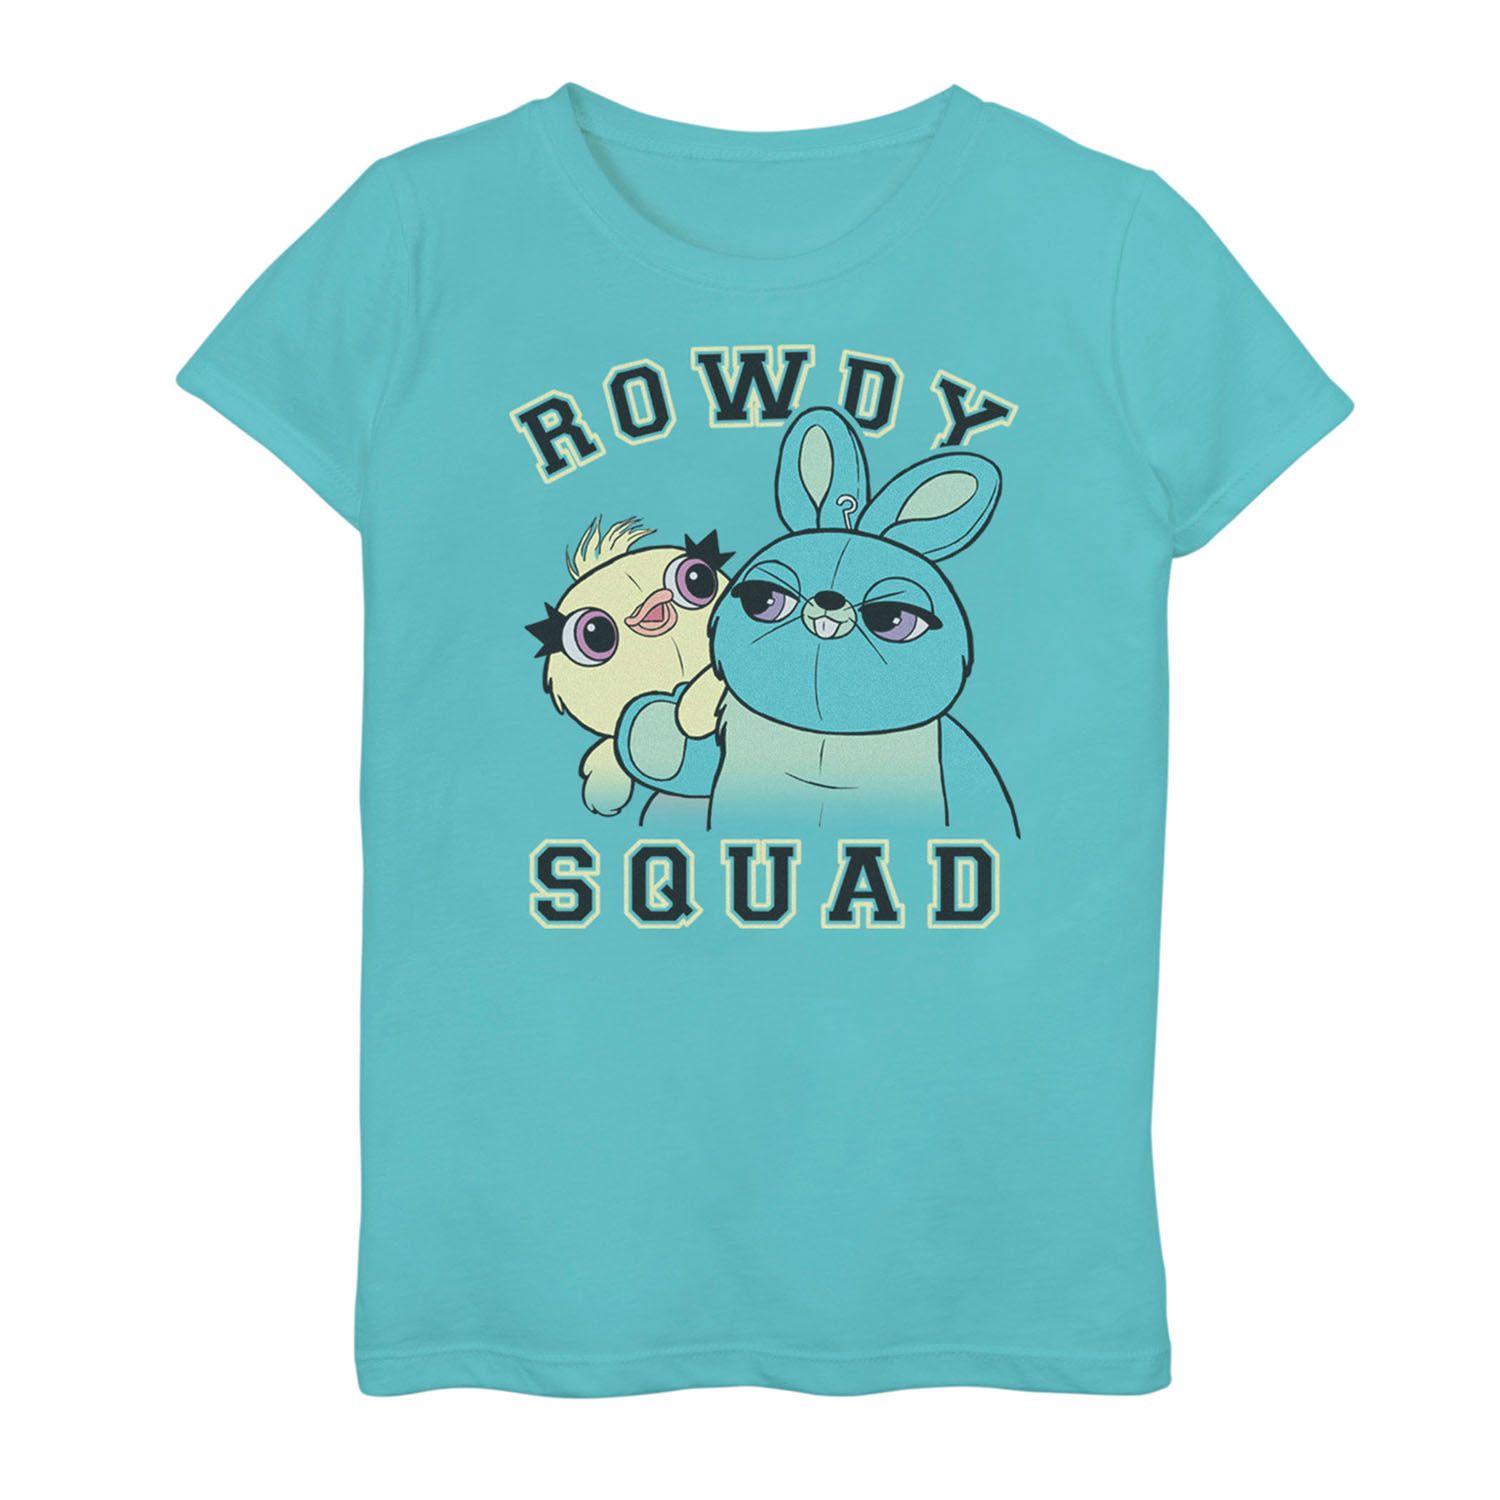 Image for Disney / Pixar Toy Story 4 Girls 7-16 Ducky & Bunny Rowdy Squad Graphic Tee at Kohl's.